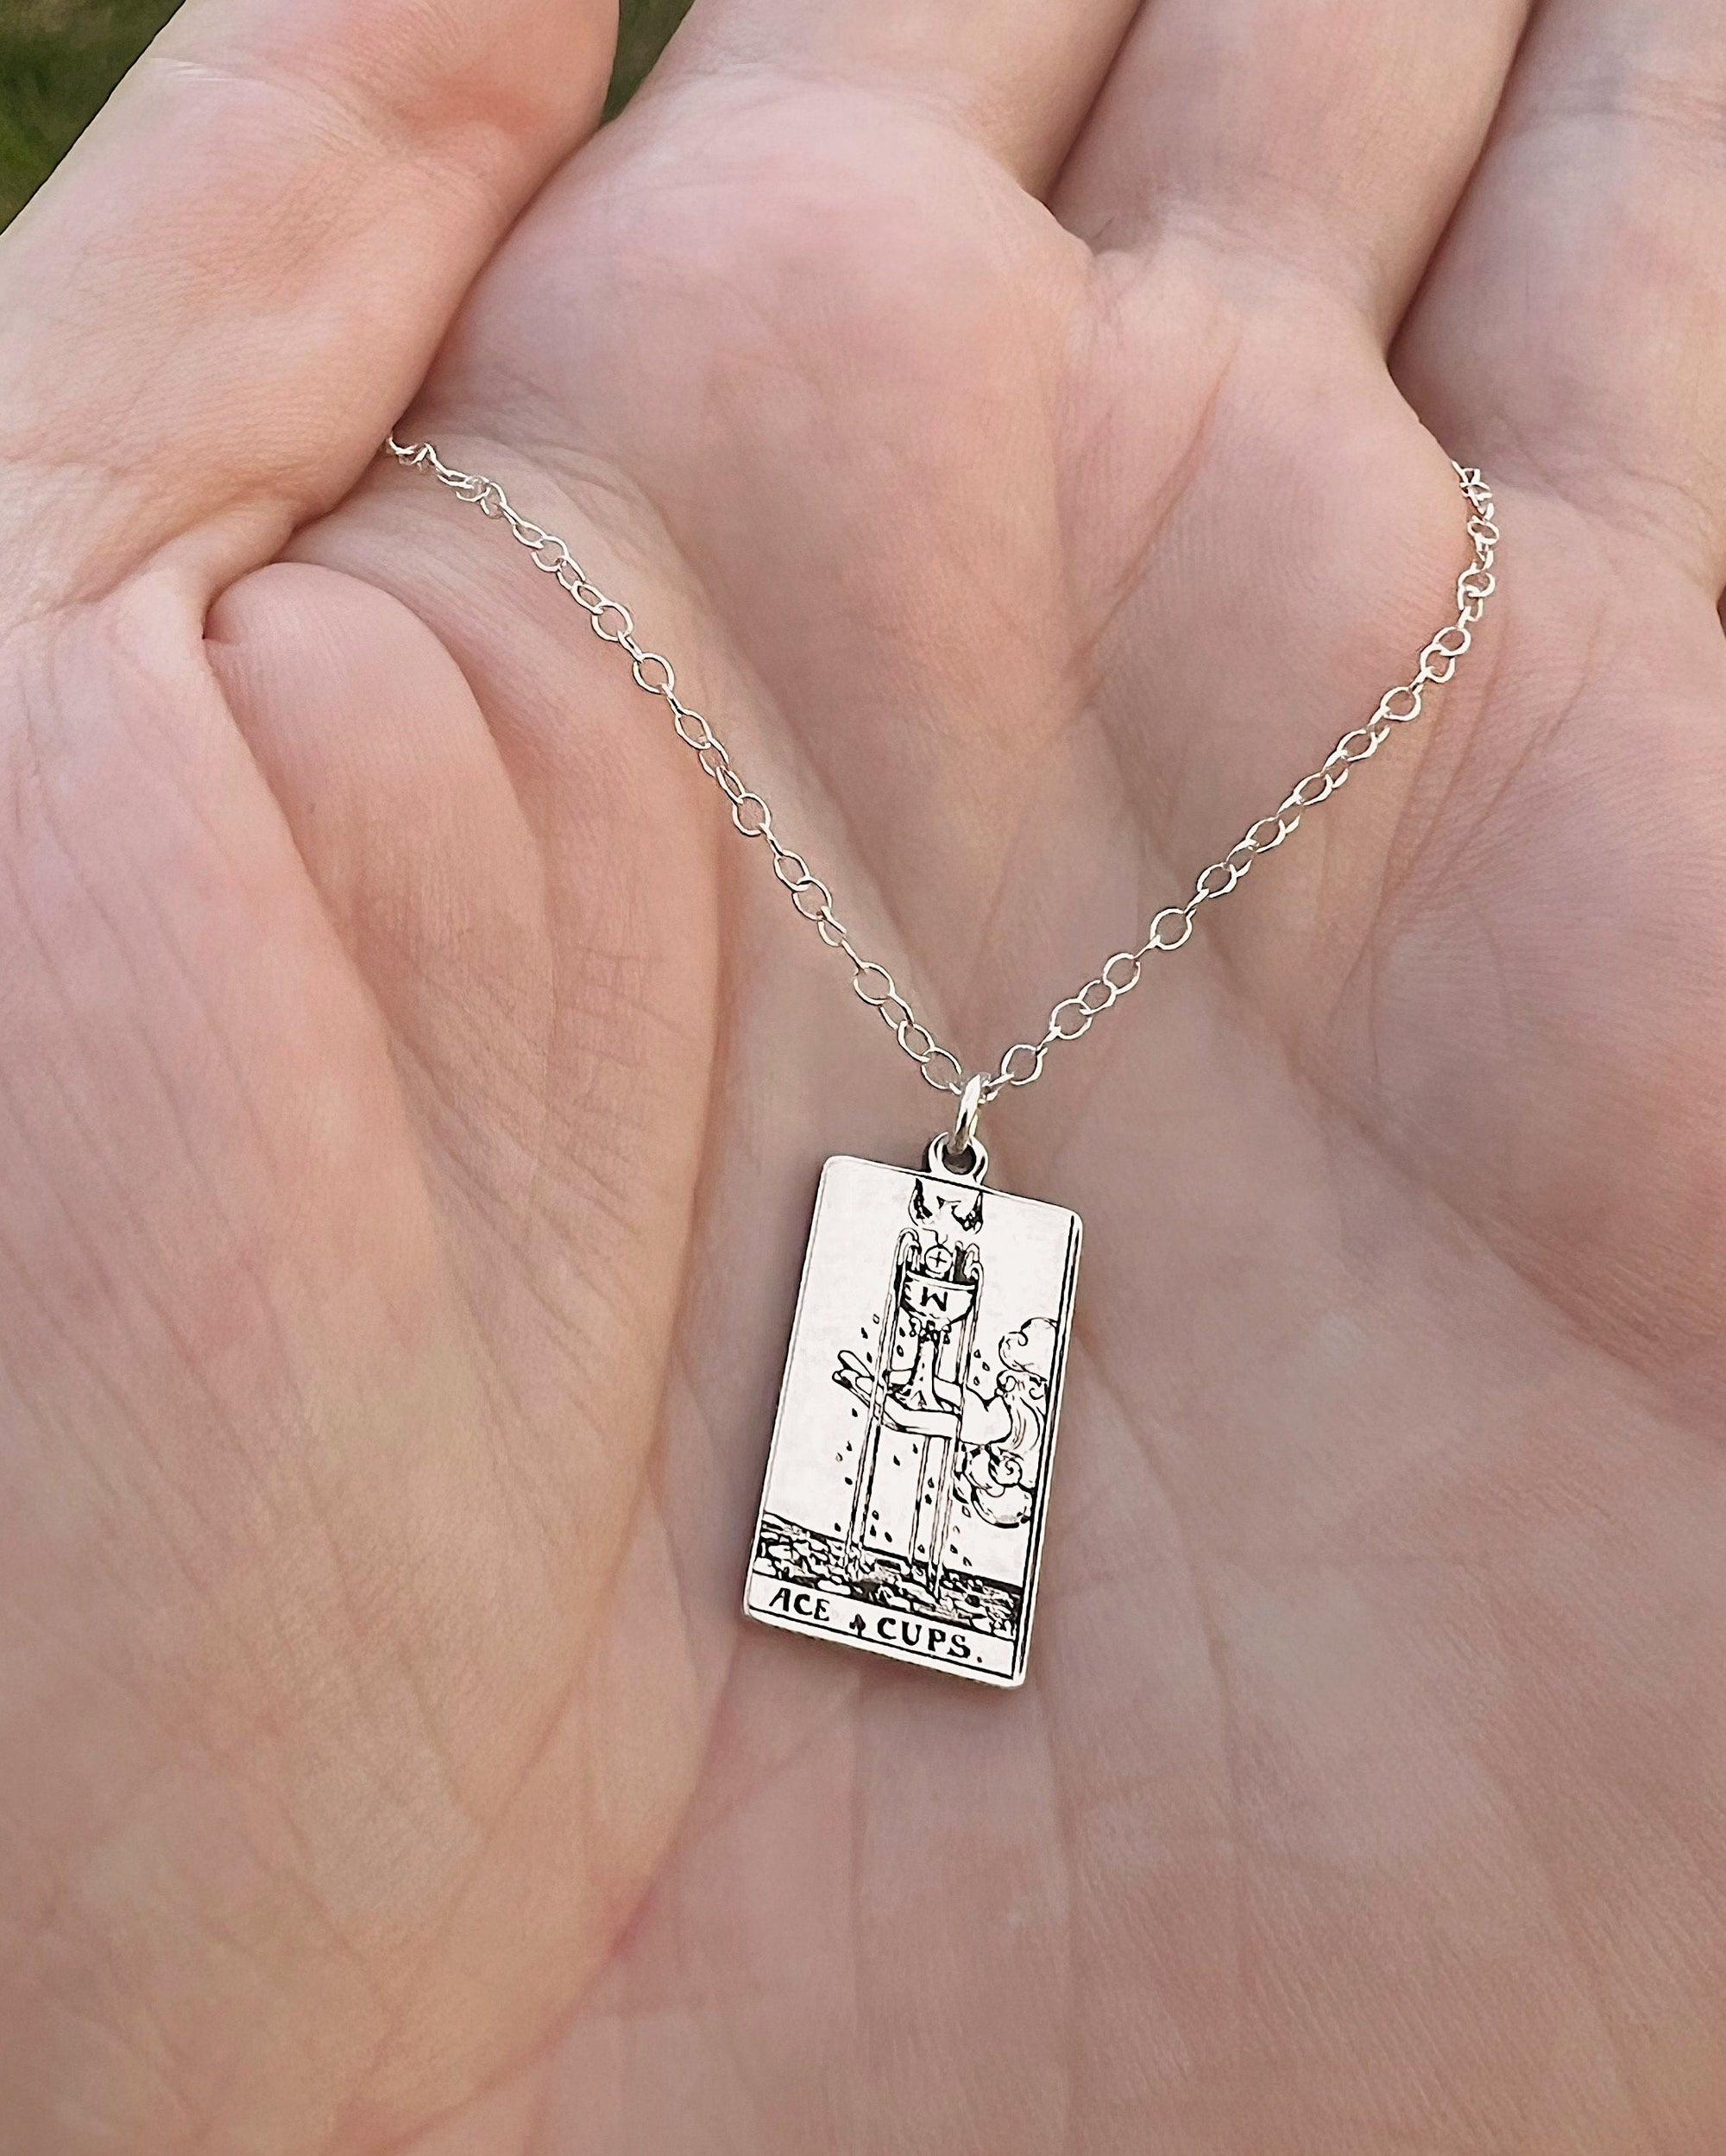 Ace of Cups Tarot Card Necklace - Sterling Silver